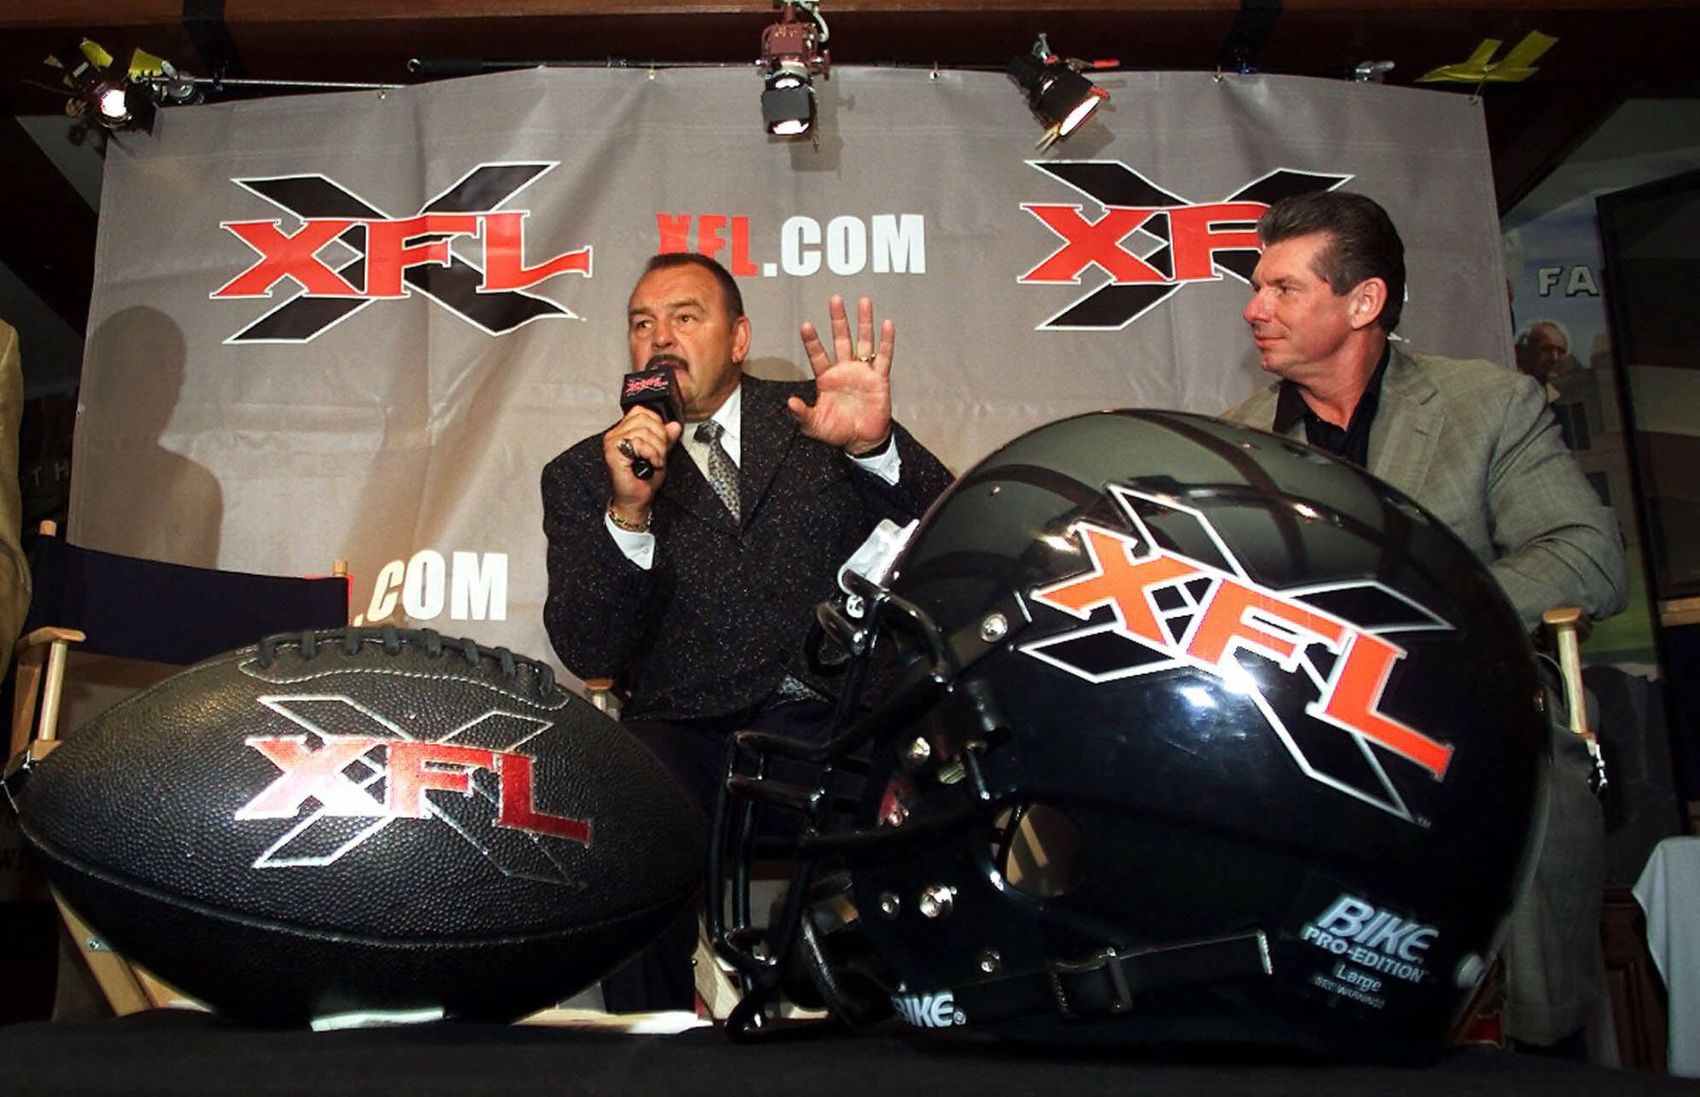 Did Vince McMahon Learn Any Lessons from XFL’s Demise in 2001?